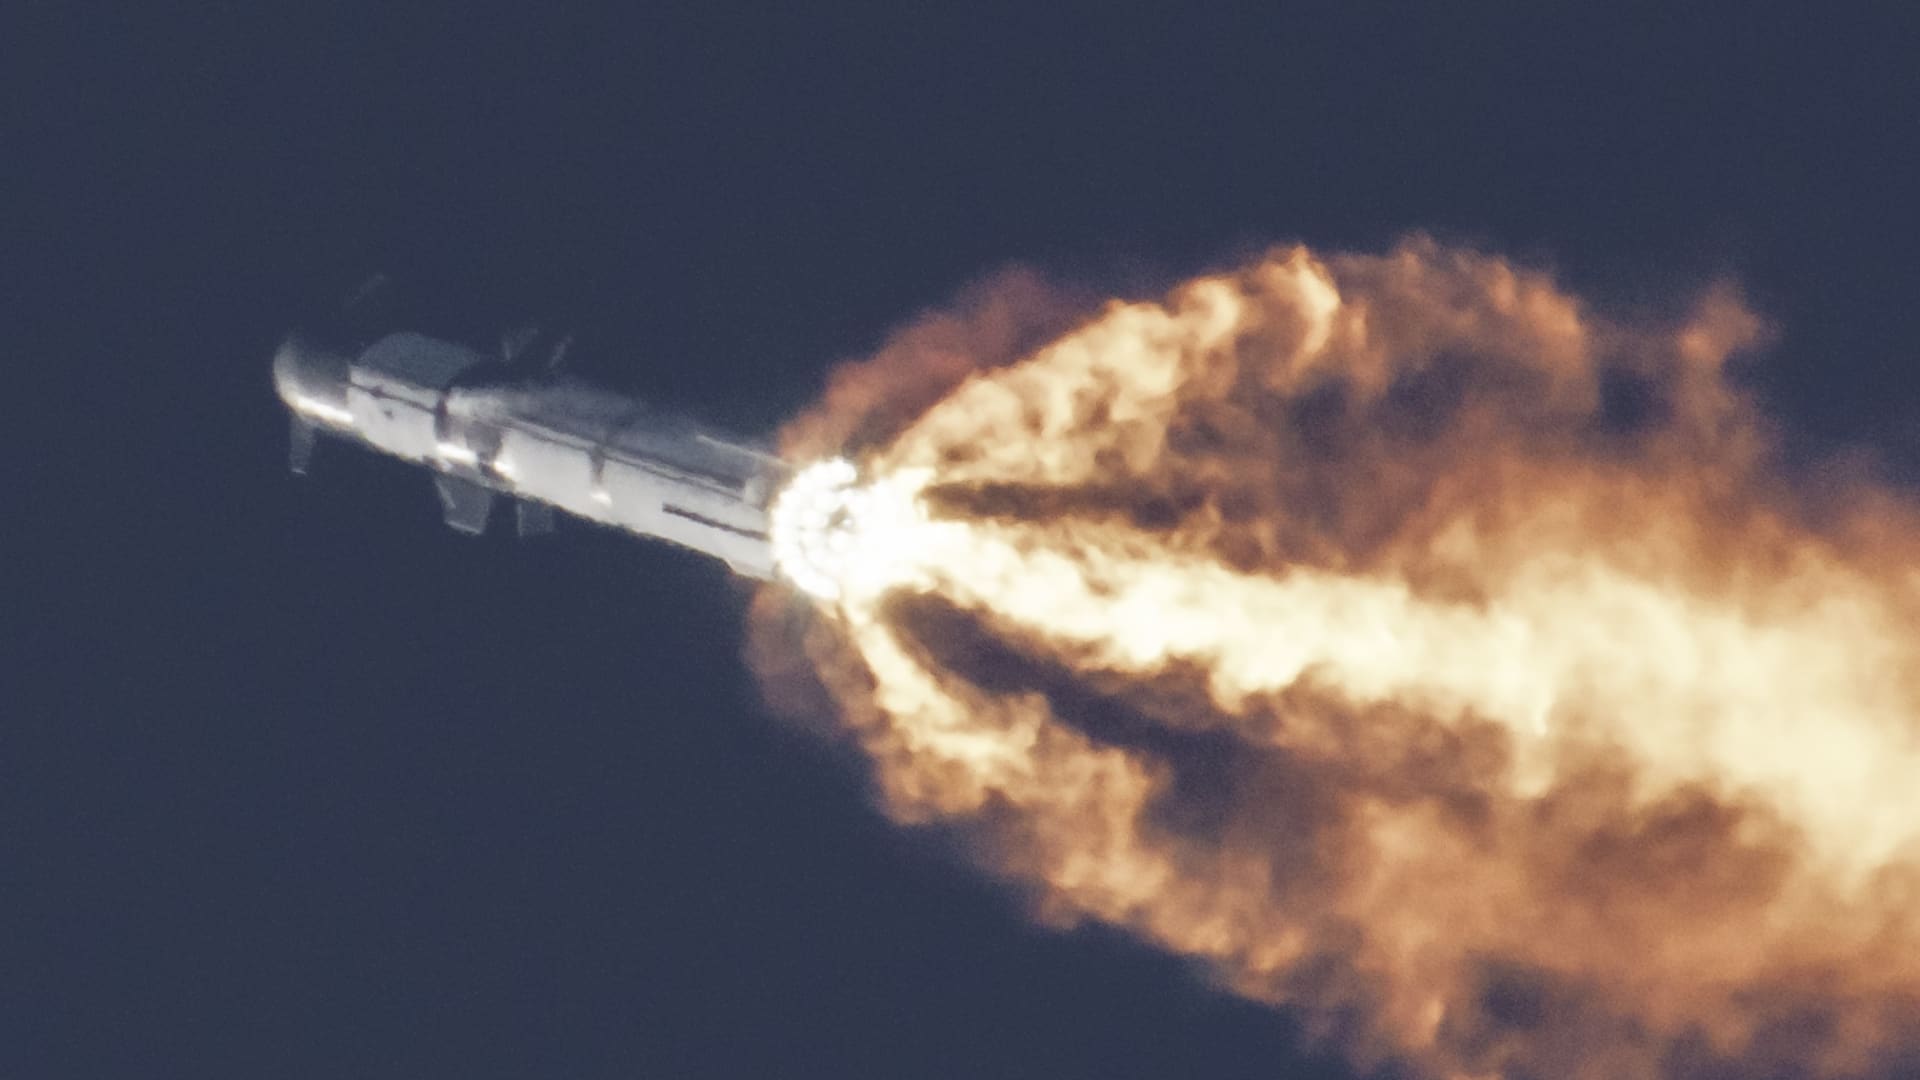 What’s next for SpaceX’s Starship after dramatic launch